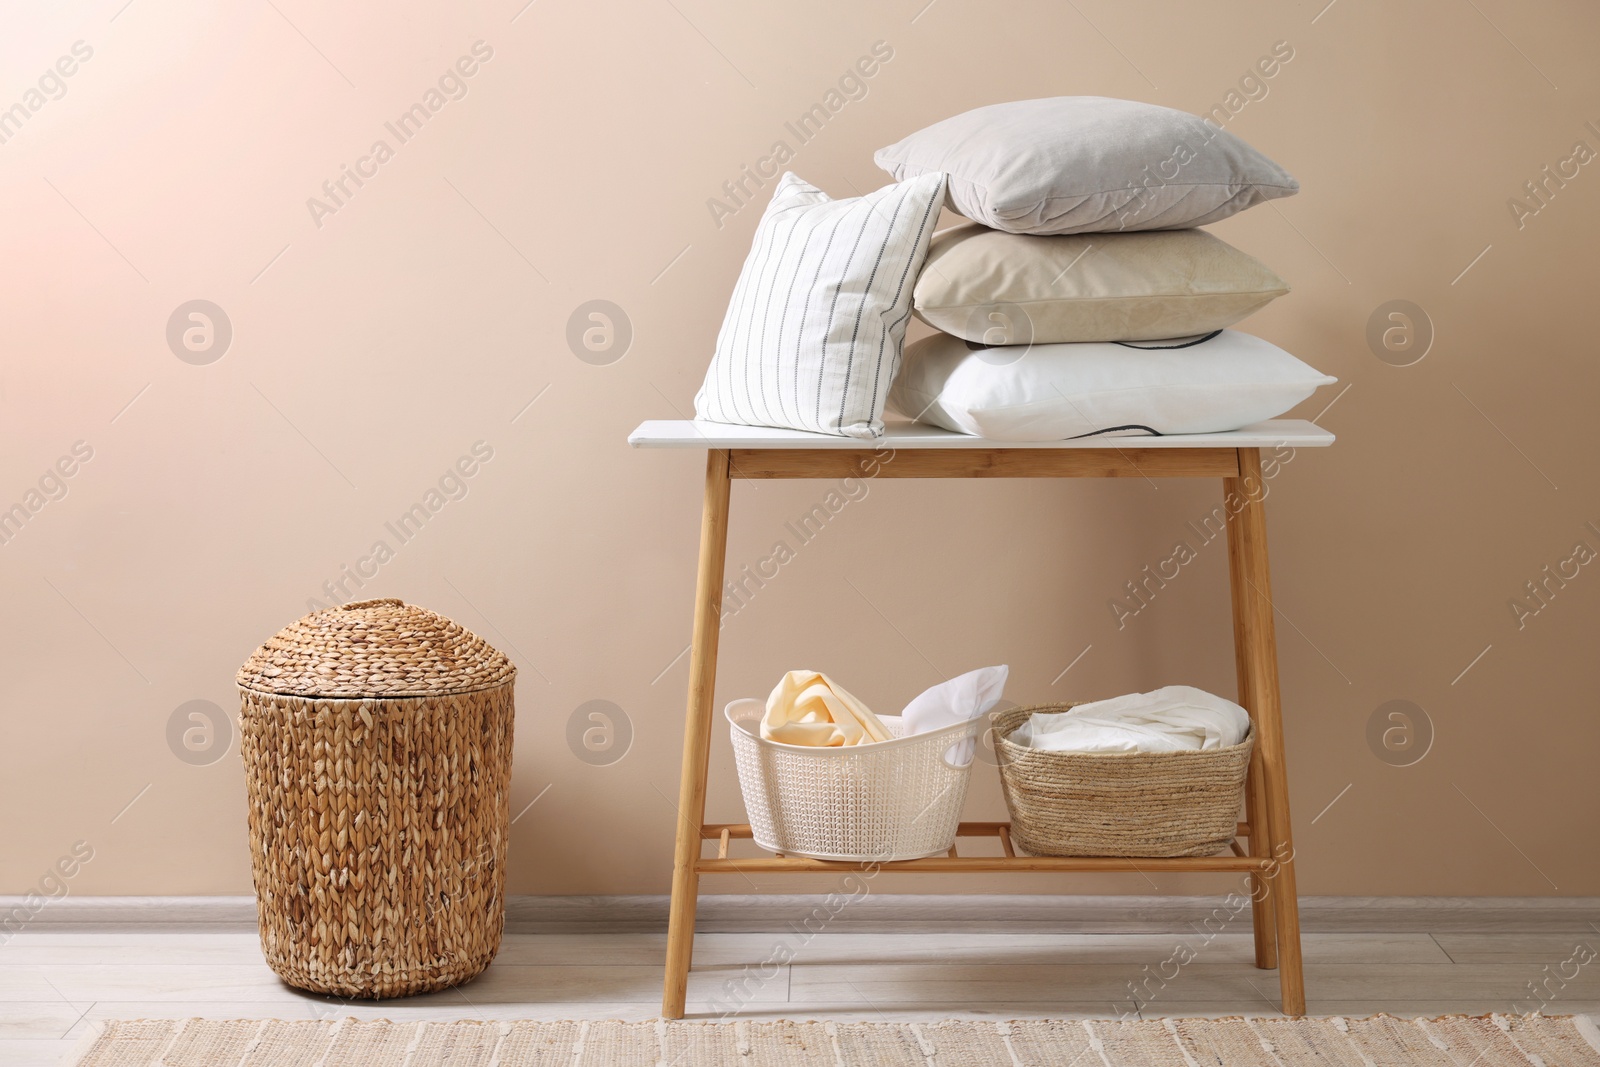 Photo of Soft pillows and laundry baskets near beige wall indoors